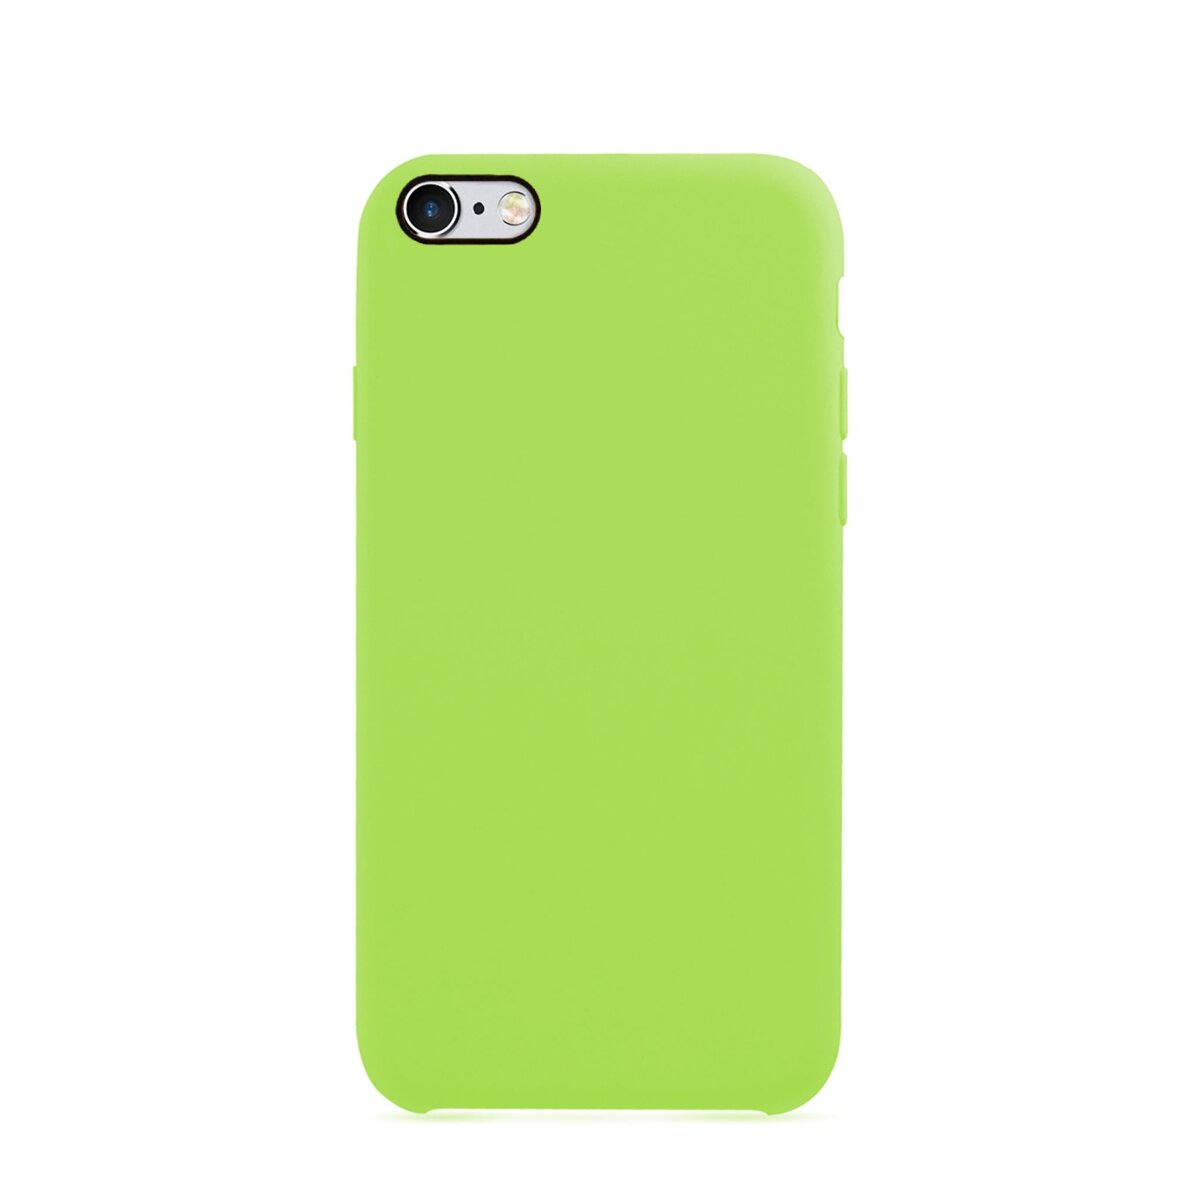 MOXIE Coque BeFluo pour Iphone 6 - Vert pomme - Polycarbonate et silicone